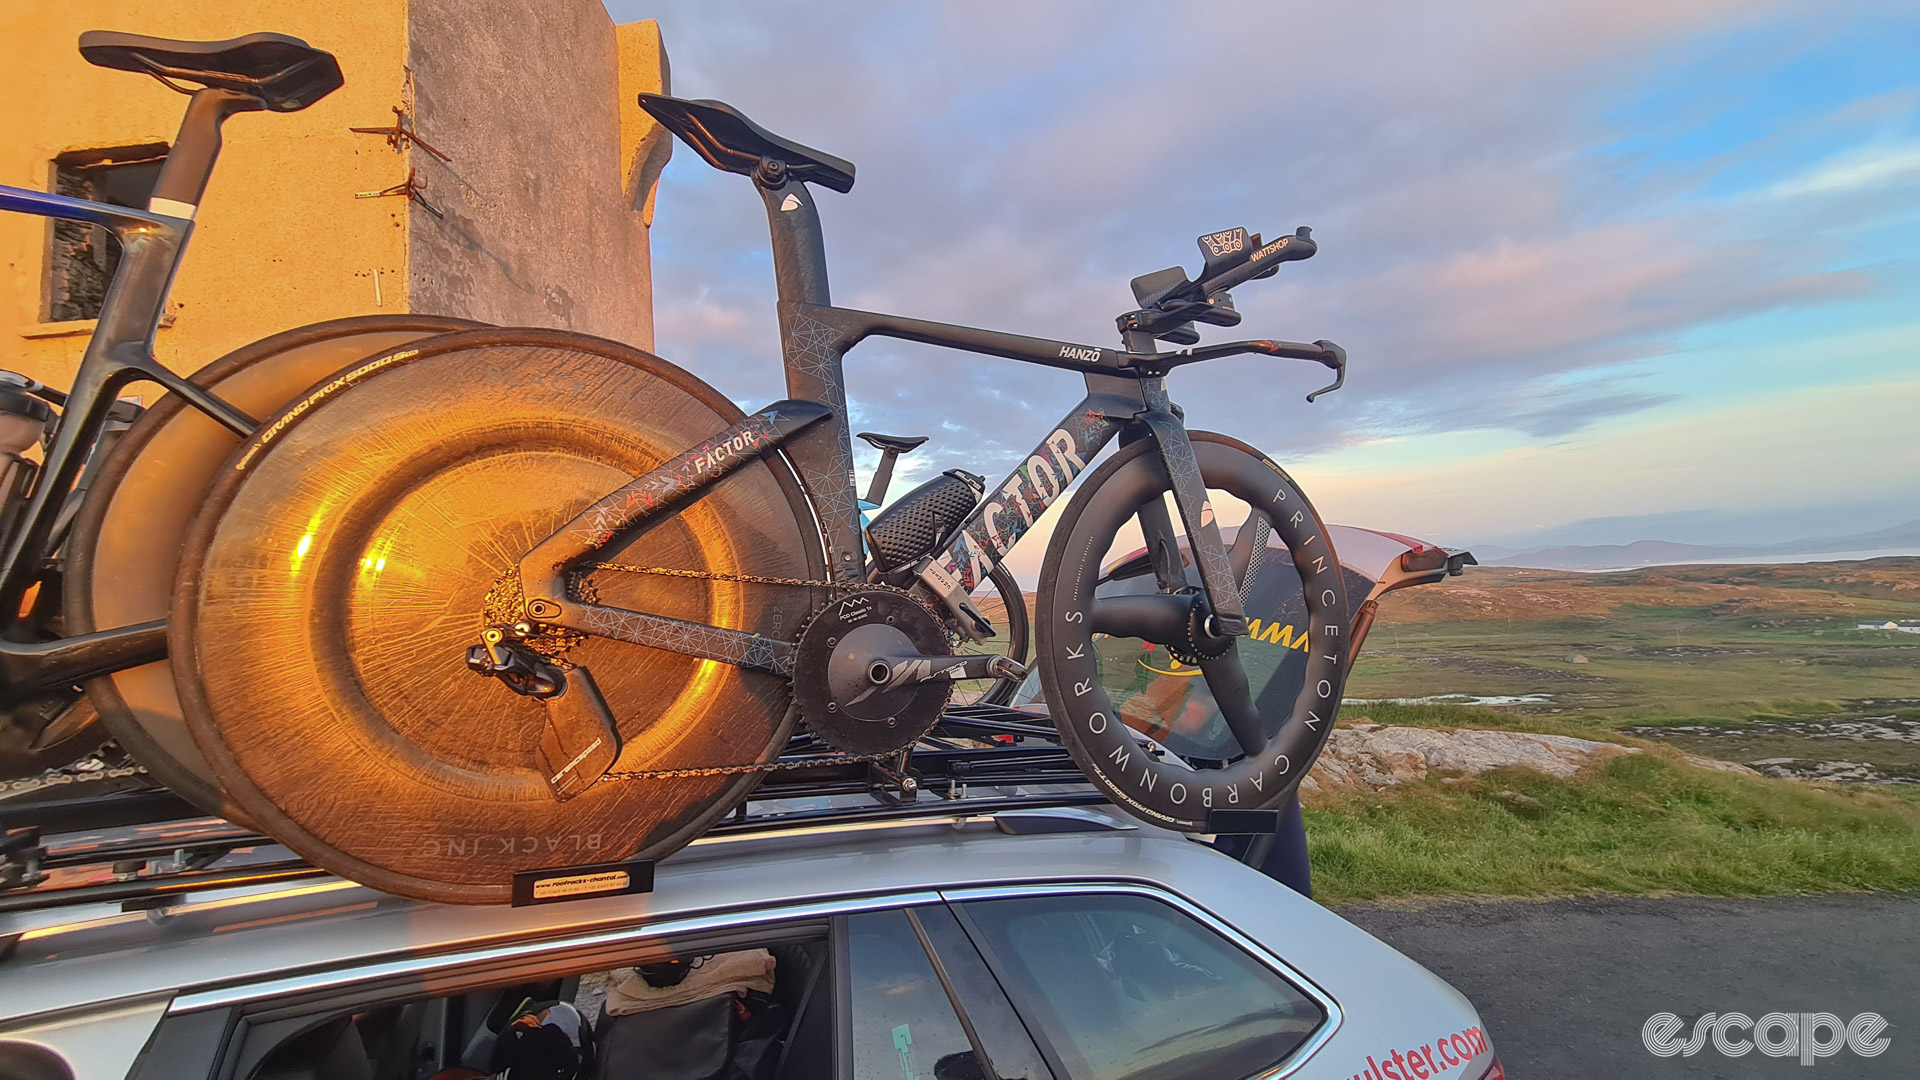 The photo shows a time trial bike on the roof of a team car